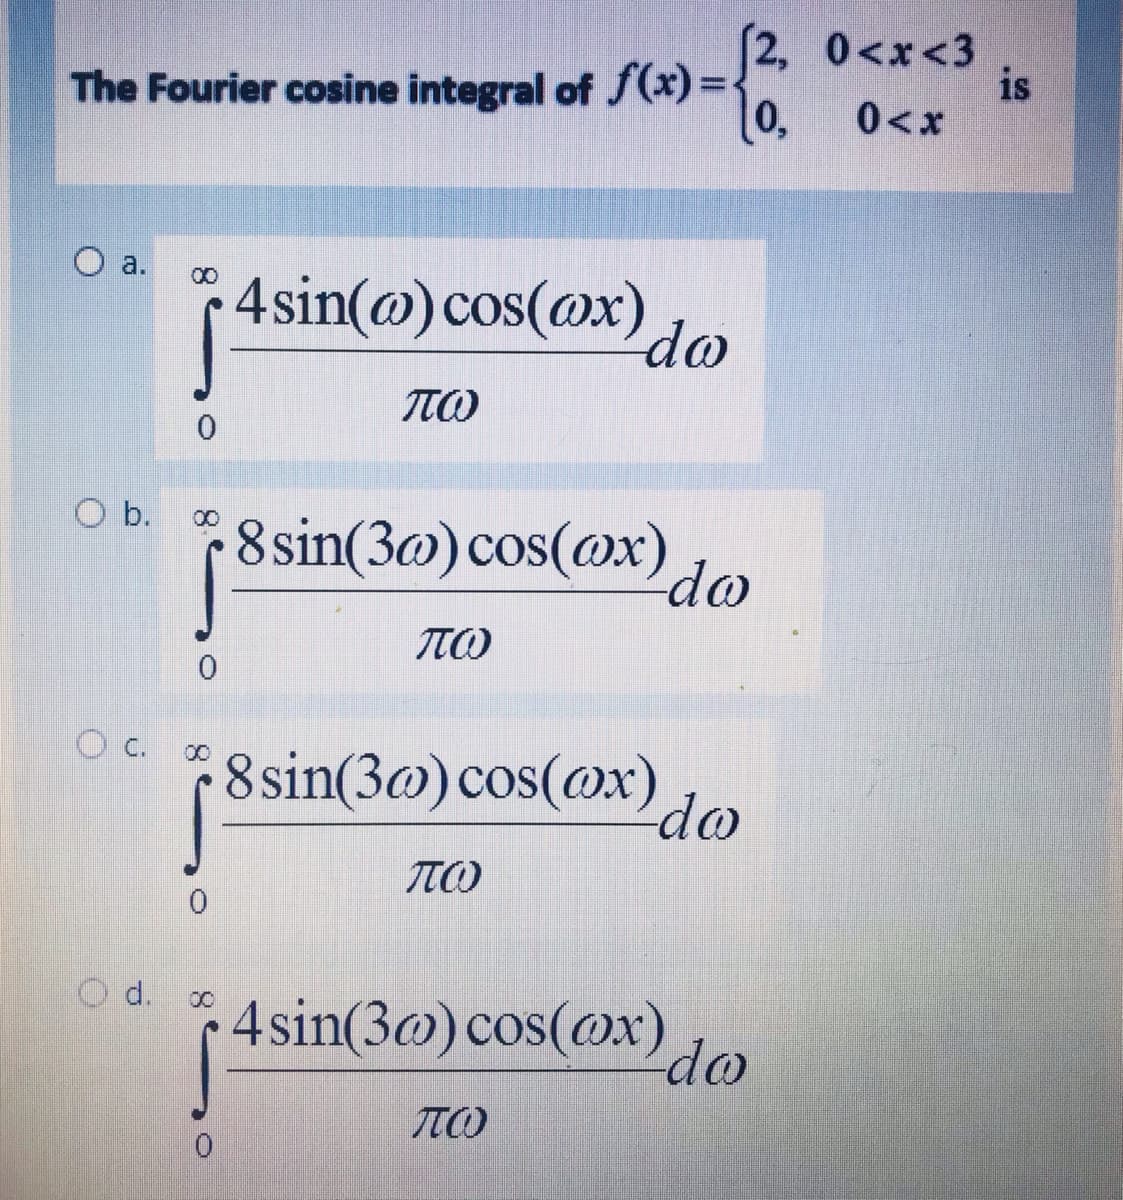 The Fourier cosine integral of f(x) =:
[0,
[2, 0<x<3
is
0<x
O a.
4sin(@) cos(@x)
00
do
O b.
8sin(3@) cos(@x)
00
do
O c.
8 sin(3@)cos(@x).
do
O d.
4 sin(3@) cos(ox)
do
8.
